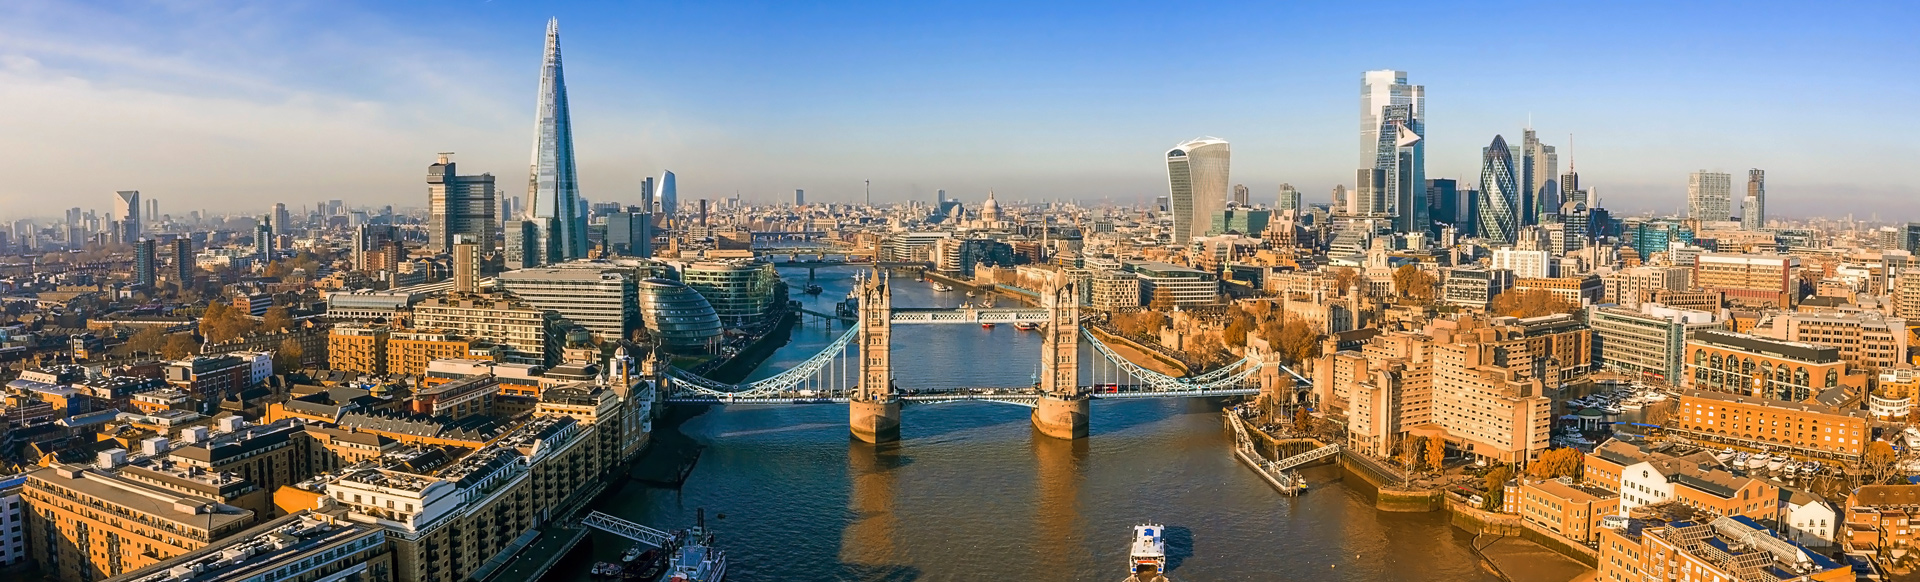 The river Thames and London skyline on a sunny day